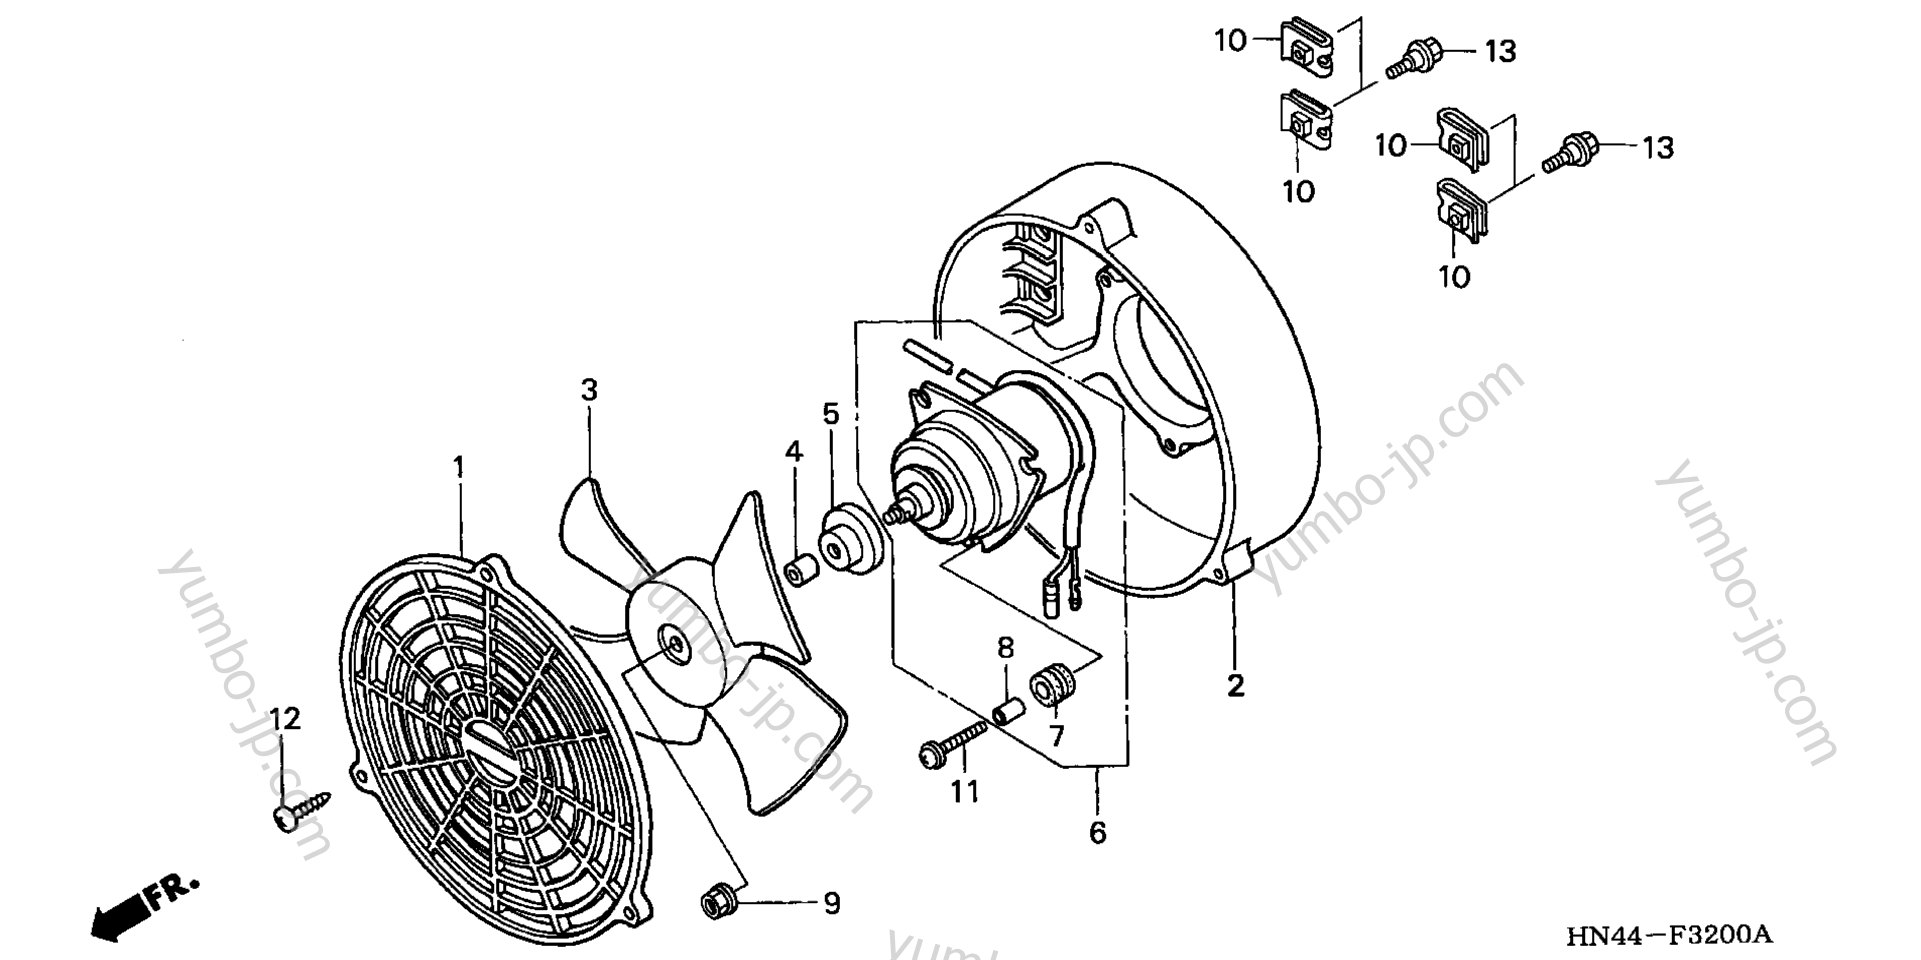 COOLING FAN for ATVs HONDA TRX350FE A 2000 year